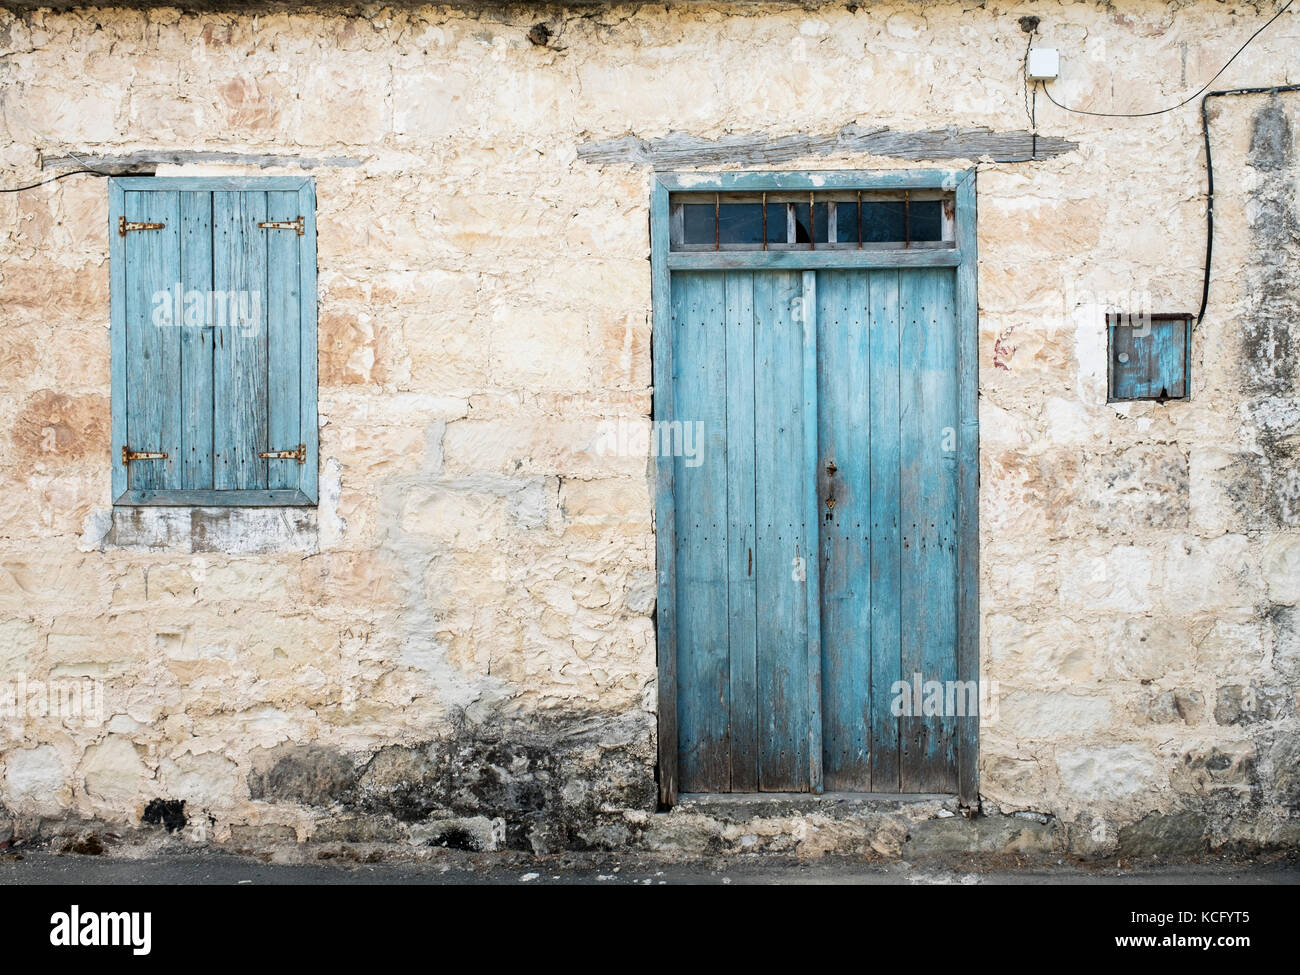 Faded door and window shutters in the Cypriot village of Agios Dimitrianos, in the Paphos region of Southern Cyprus. Stock Photo